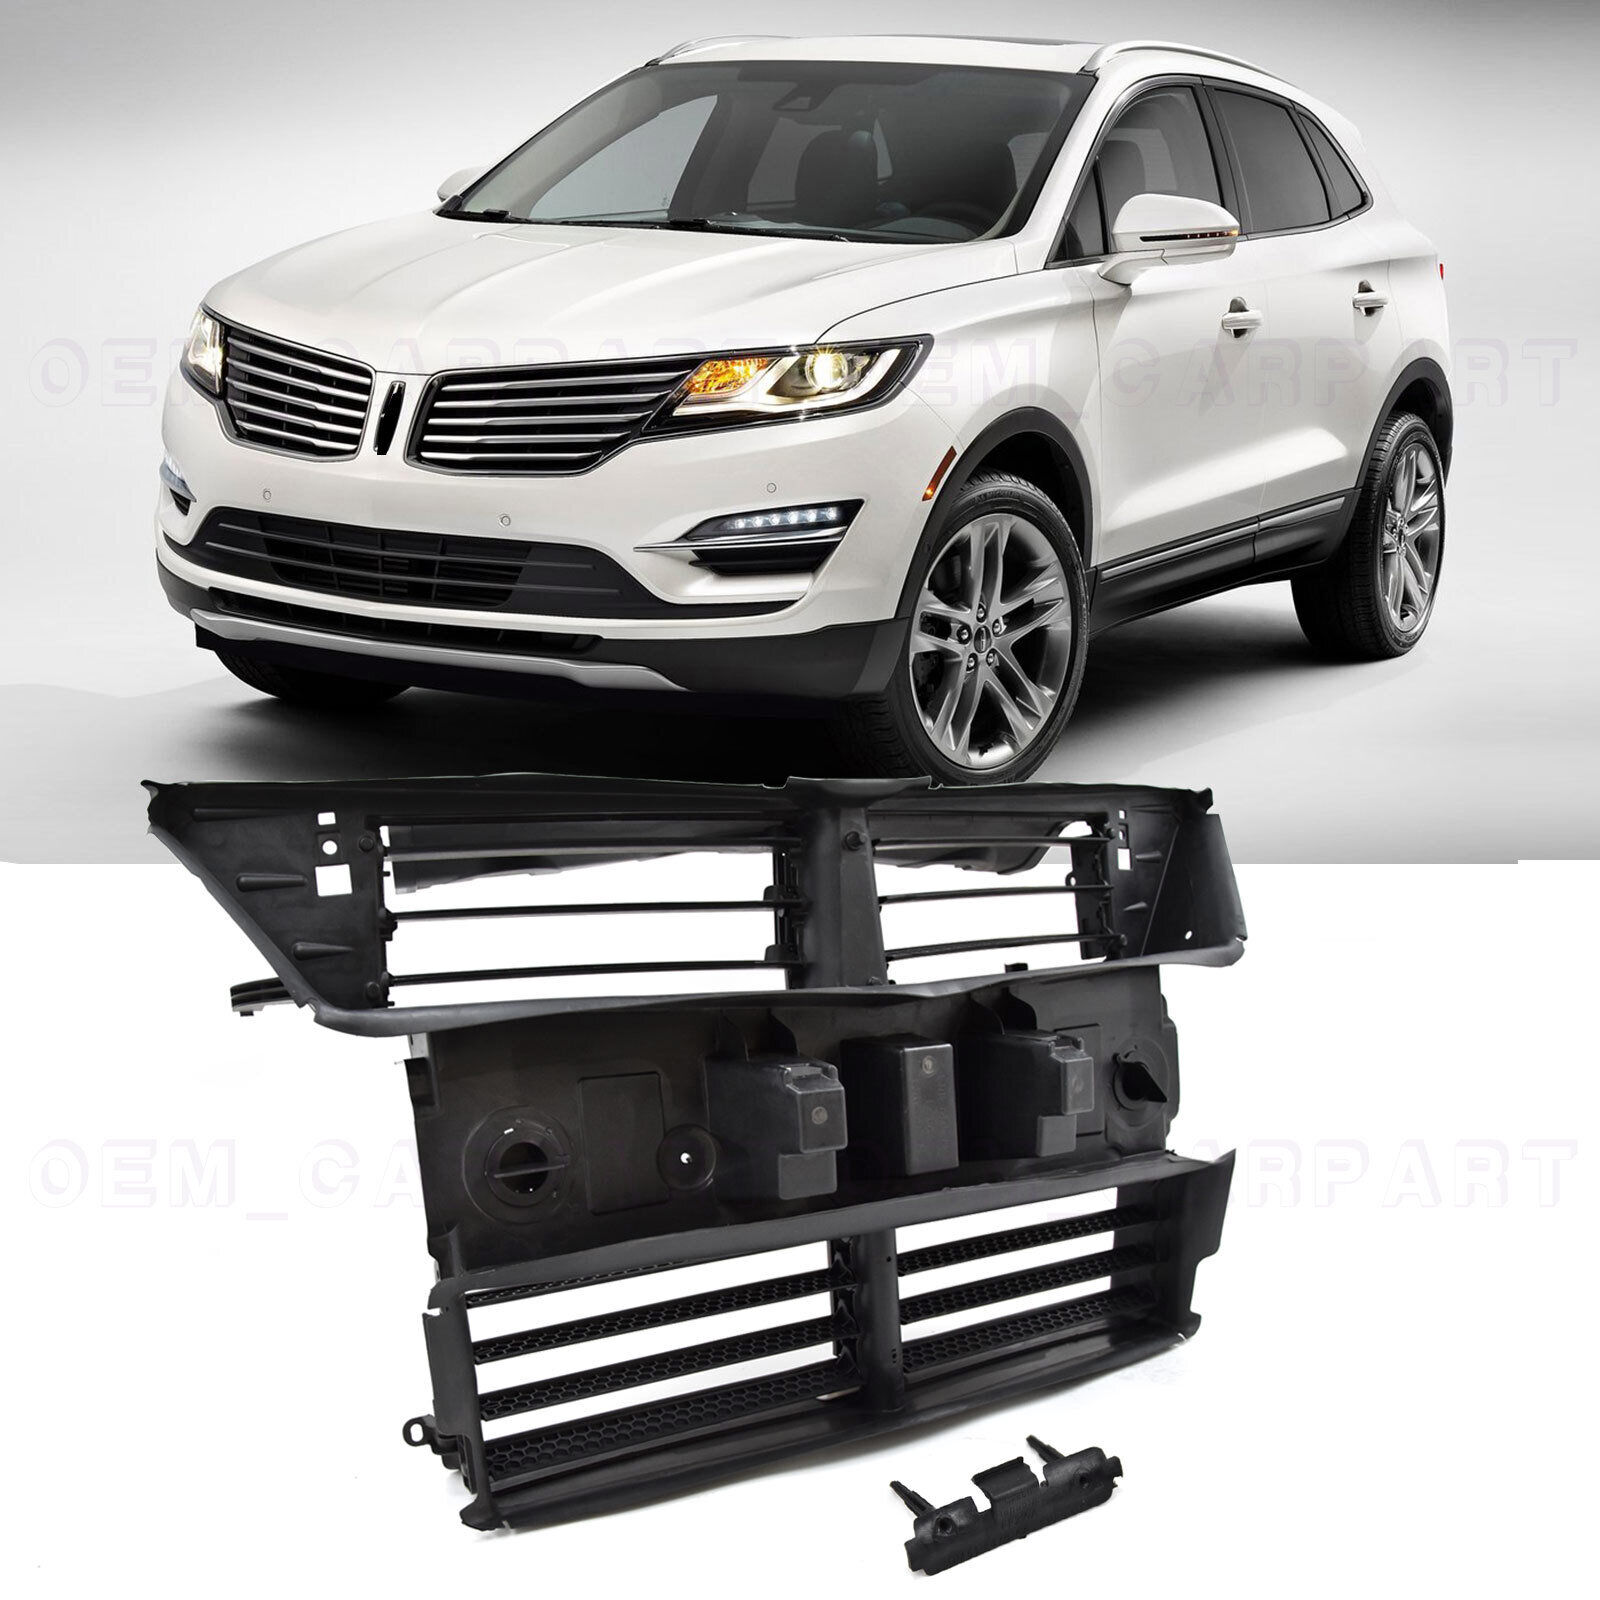 Active Grille Shutter Assembly for Lincoln MKC 2015 2016 2017 2018 L4 2.0L 2.3L